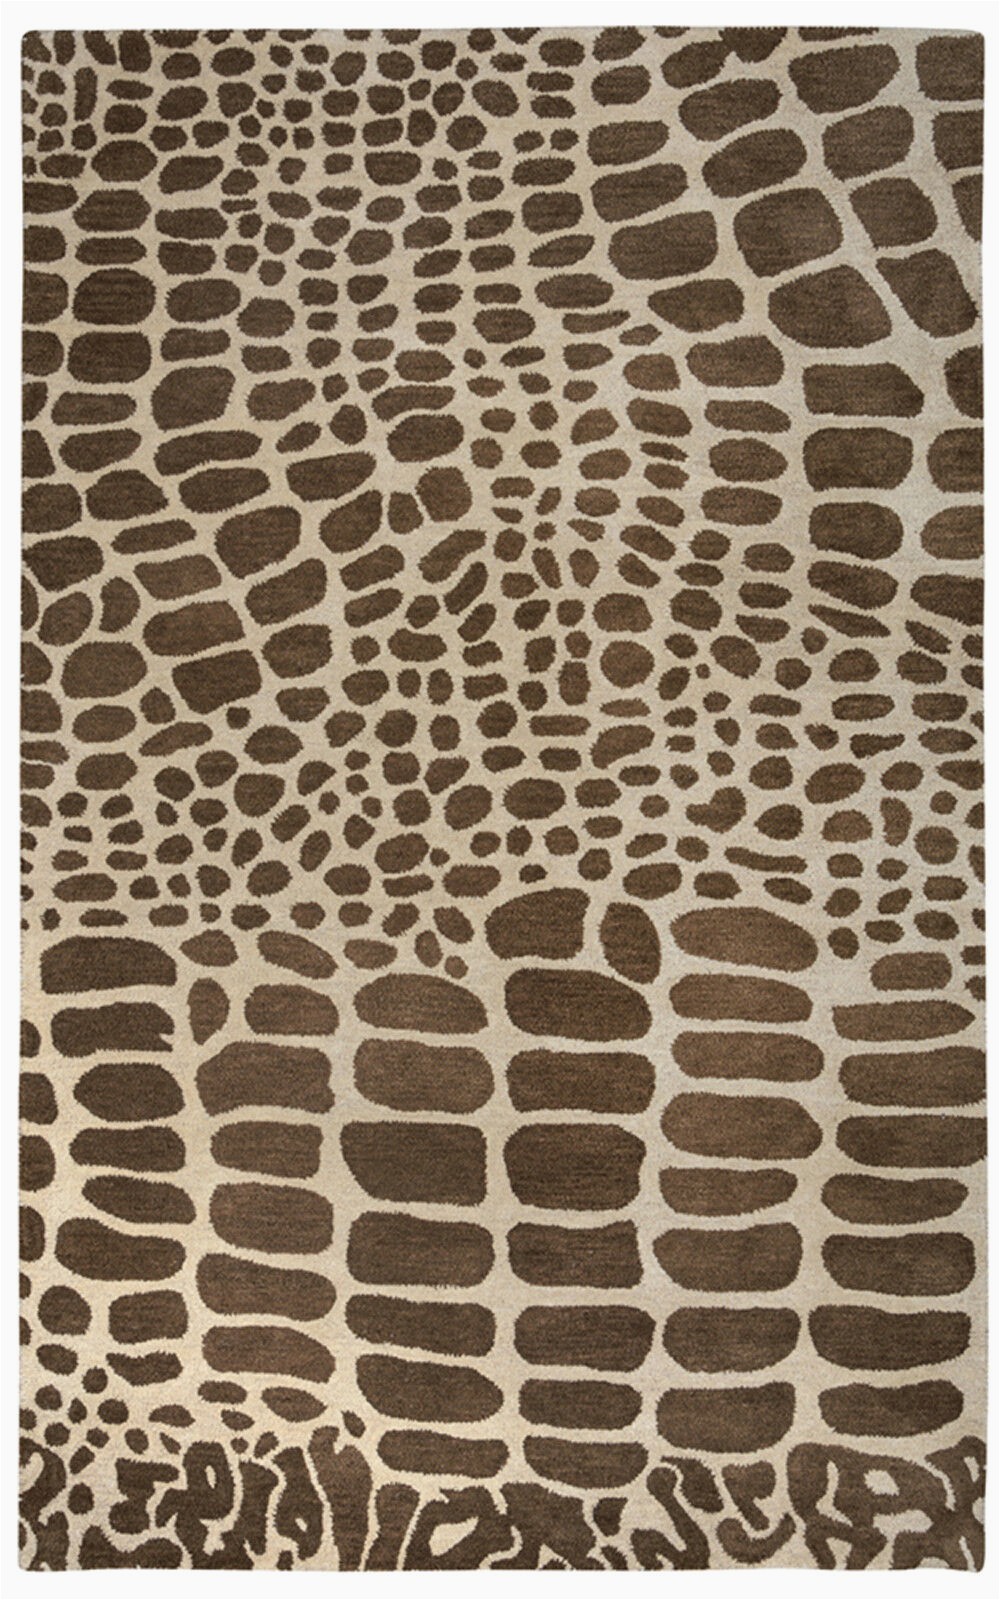 Leopard Print area Rug Target Rizzy Rugs Giraffe Wool Tufted Contemporary area Rug Animal